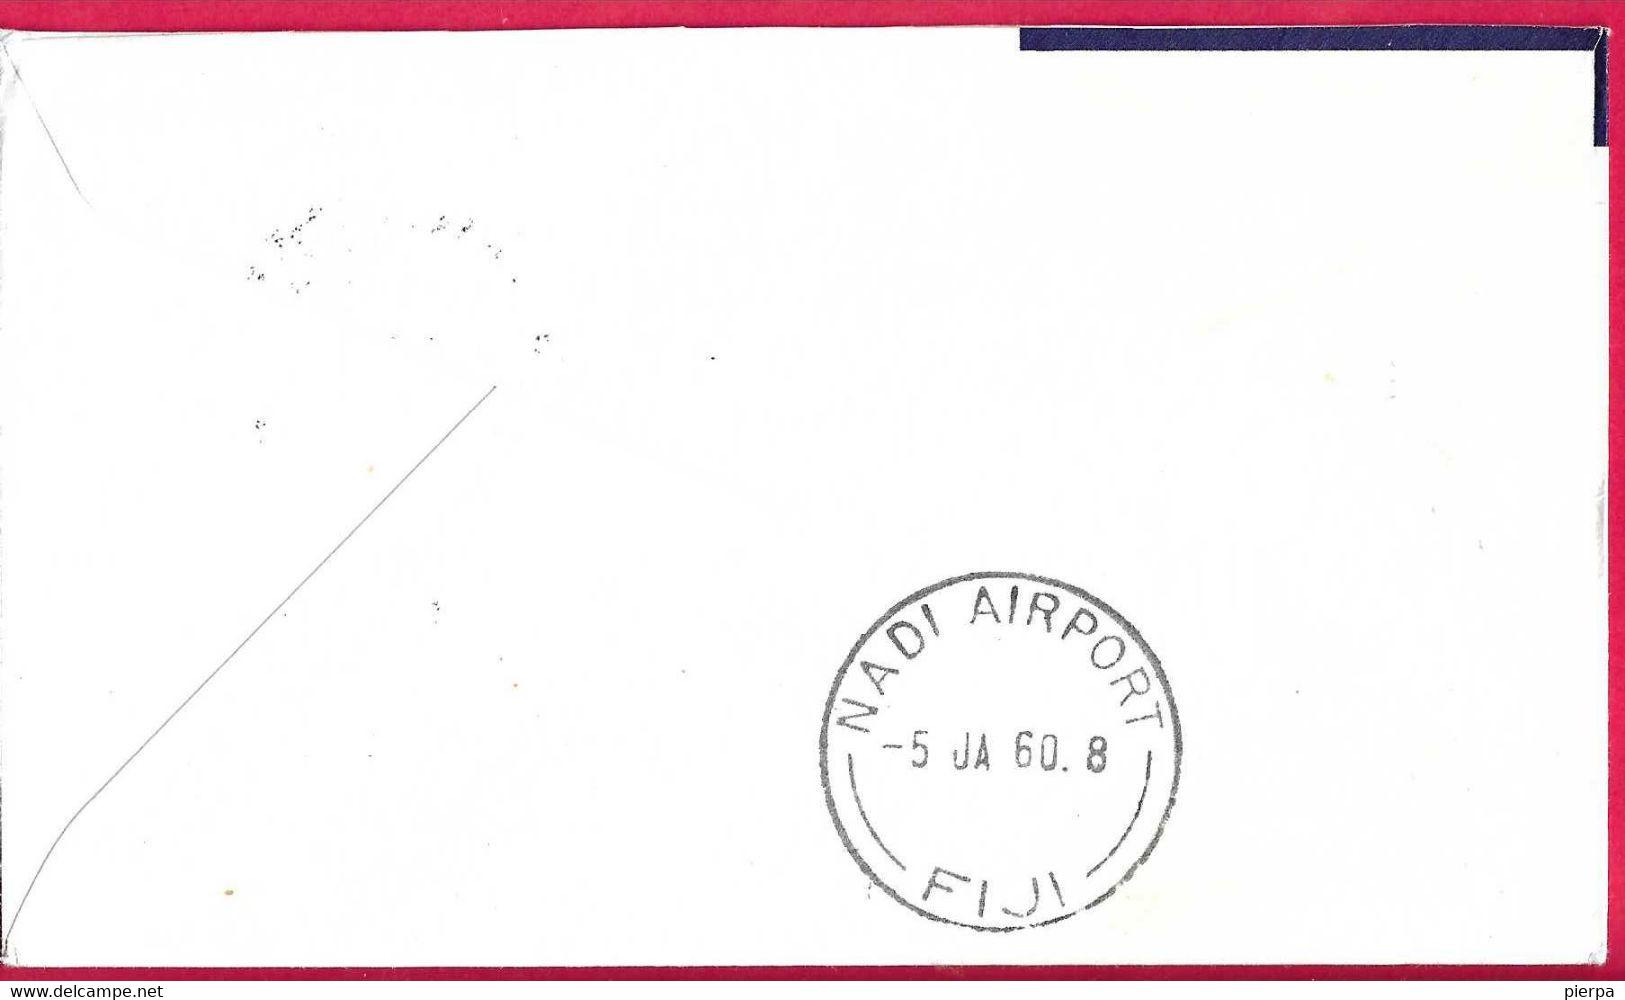 AUSTRALIA - FIRST FLIGHT TEALECTRA AUCKLAND TO NADI AIRPORT (FIJI) * 5.JAN.60* ON OFFICIAL ENVELOPE - First Flight Covers